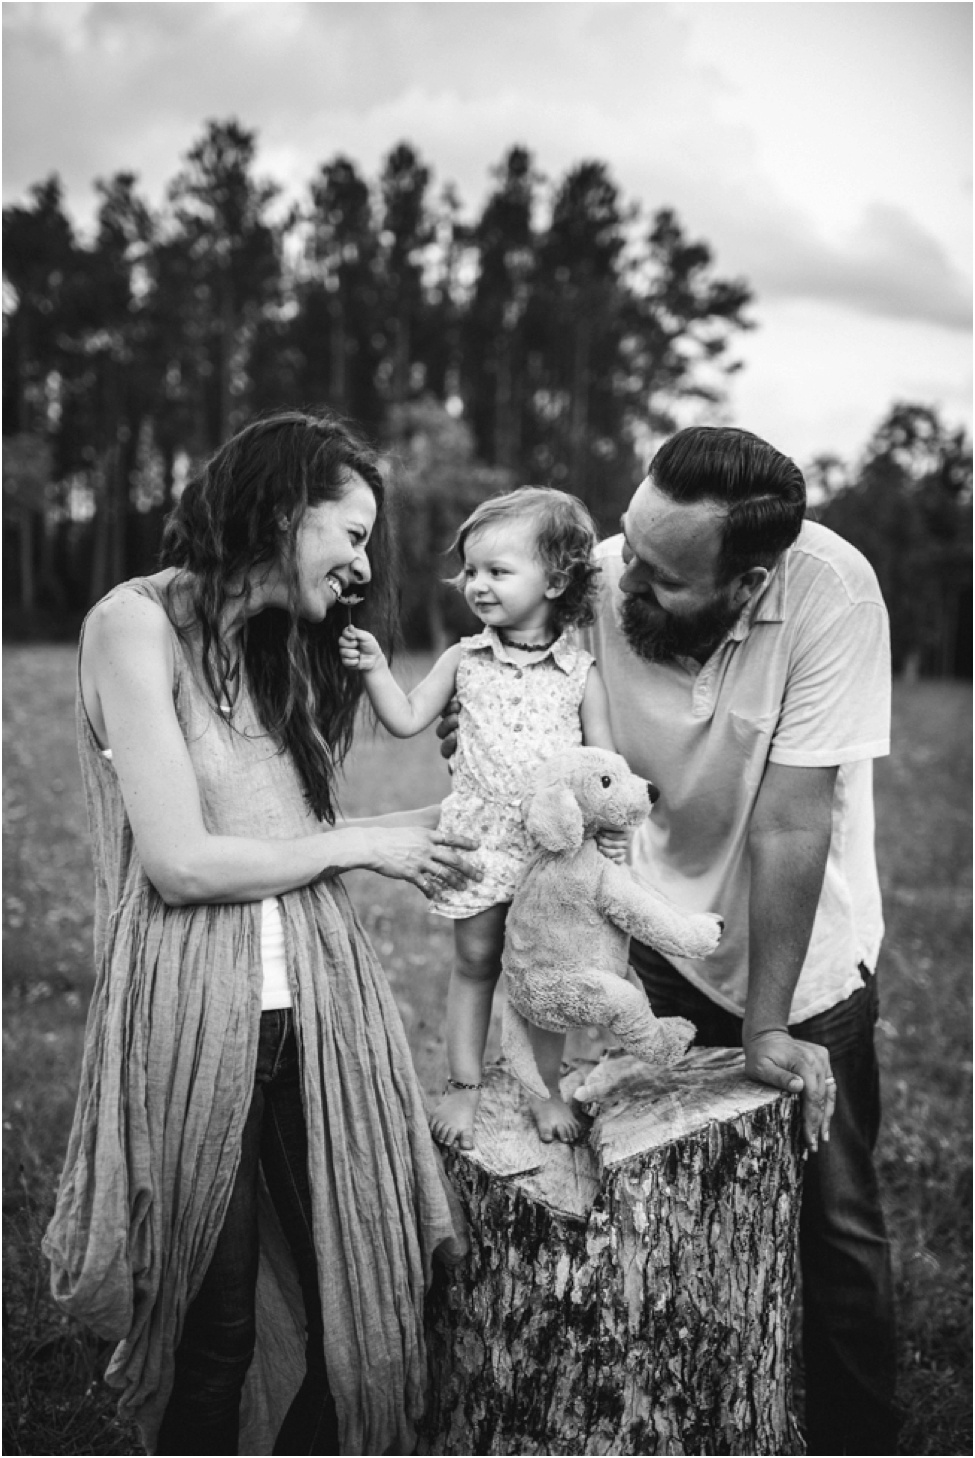 Mini Flower Field Sessions for families and children | Jacksonville, Ponte Vedra family and baby photographer